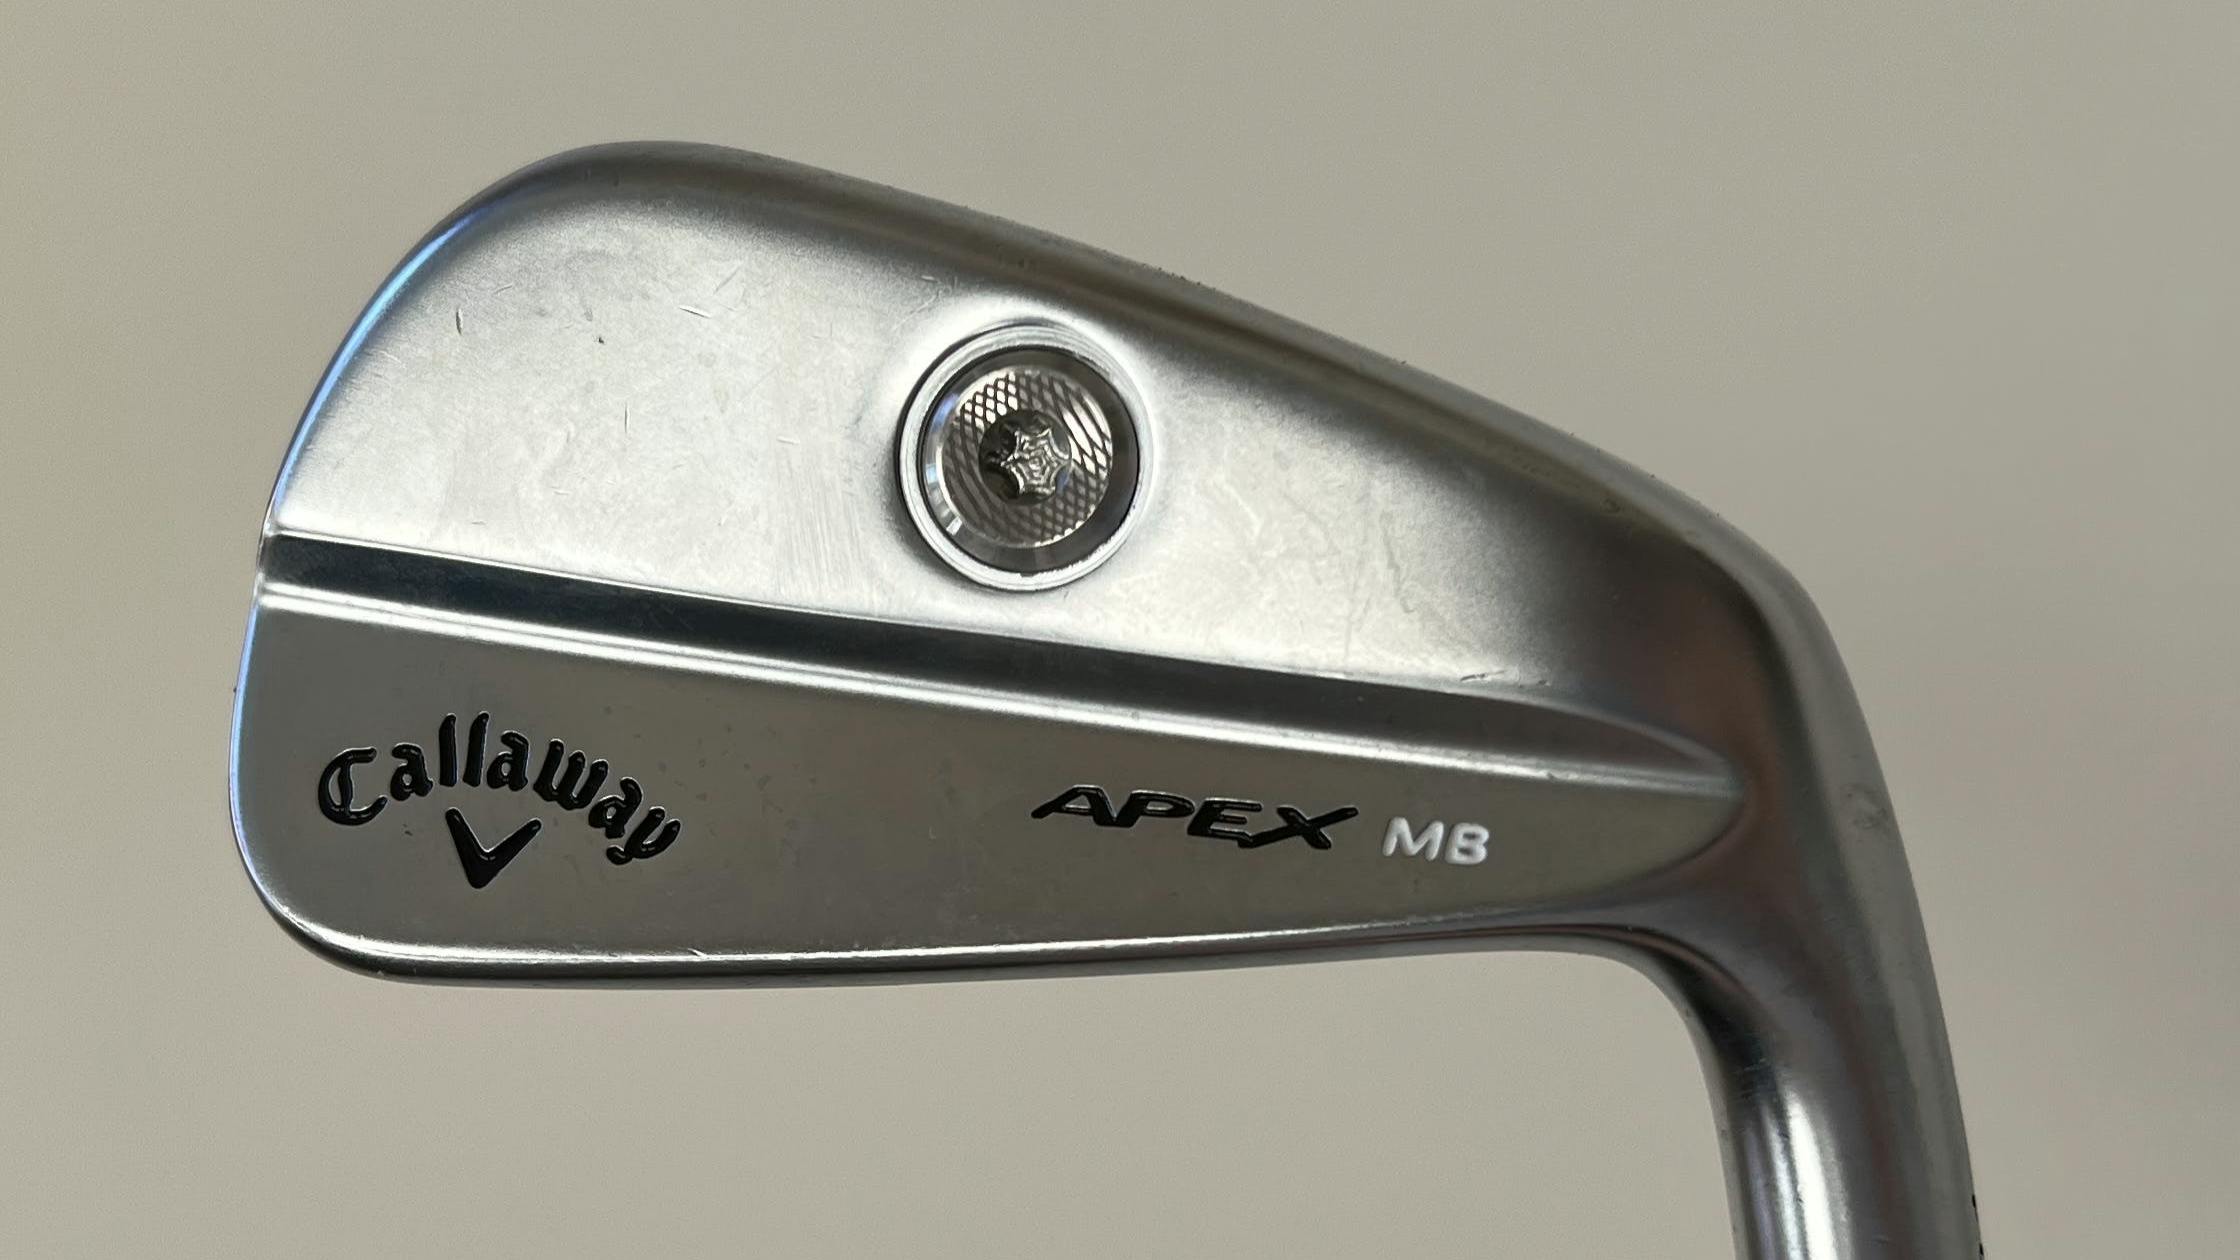 Head of the Callaway APEX MB 21 Irons.